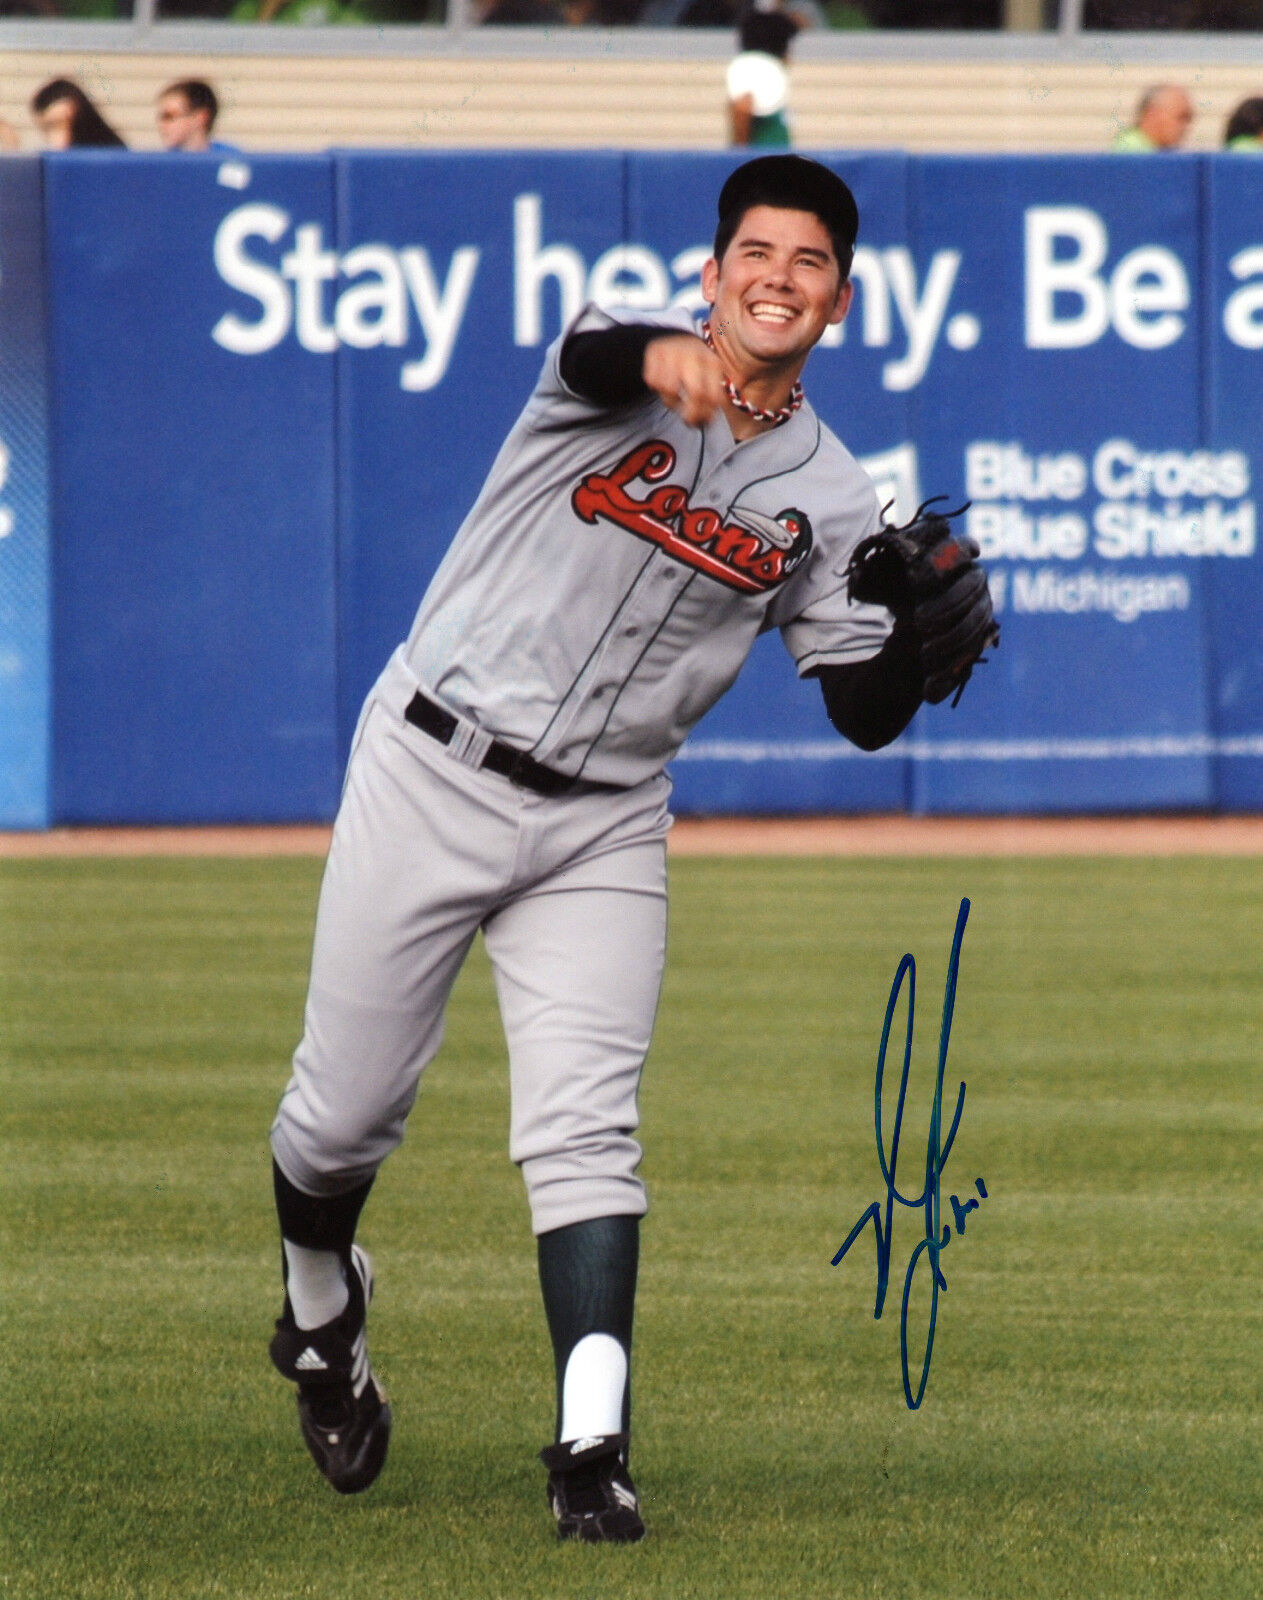 Zach Lee Dodgers top prospect signed auto Photo Poster painting Loons Top Prospect Photo Poster painting 3